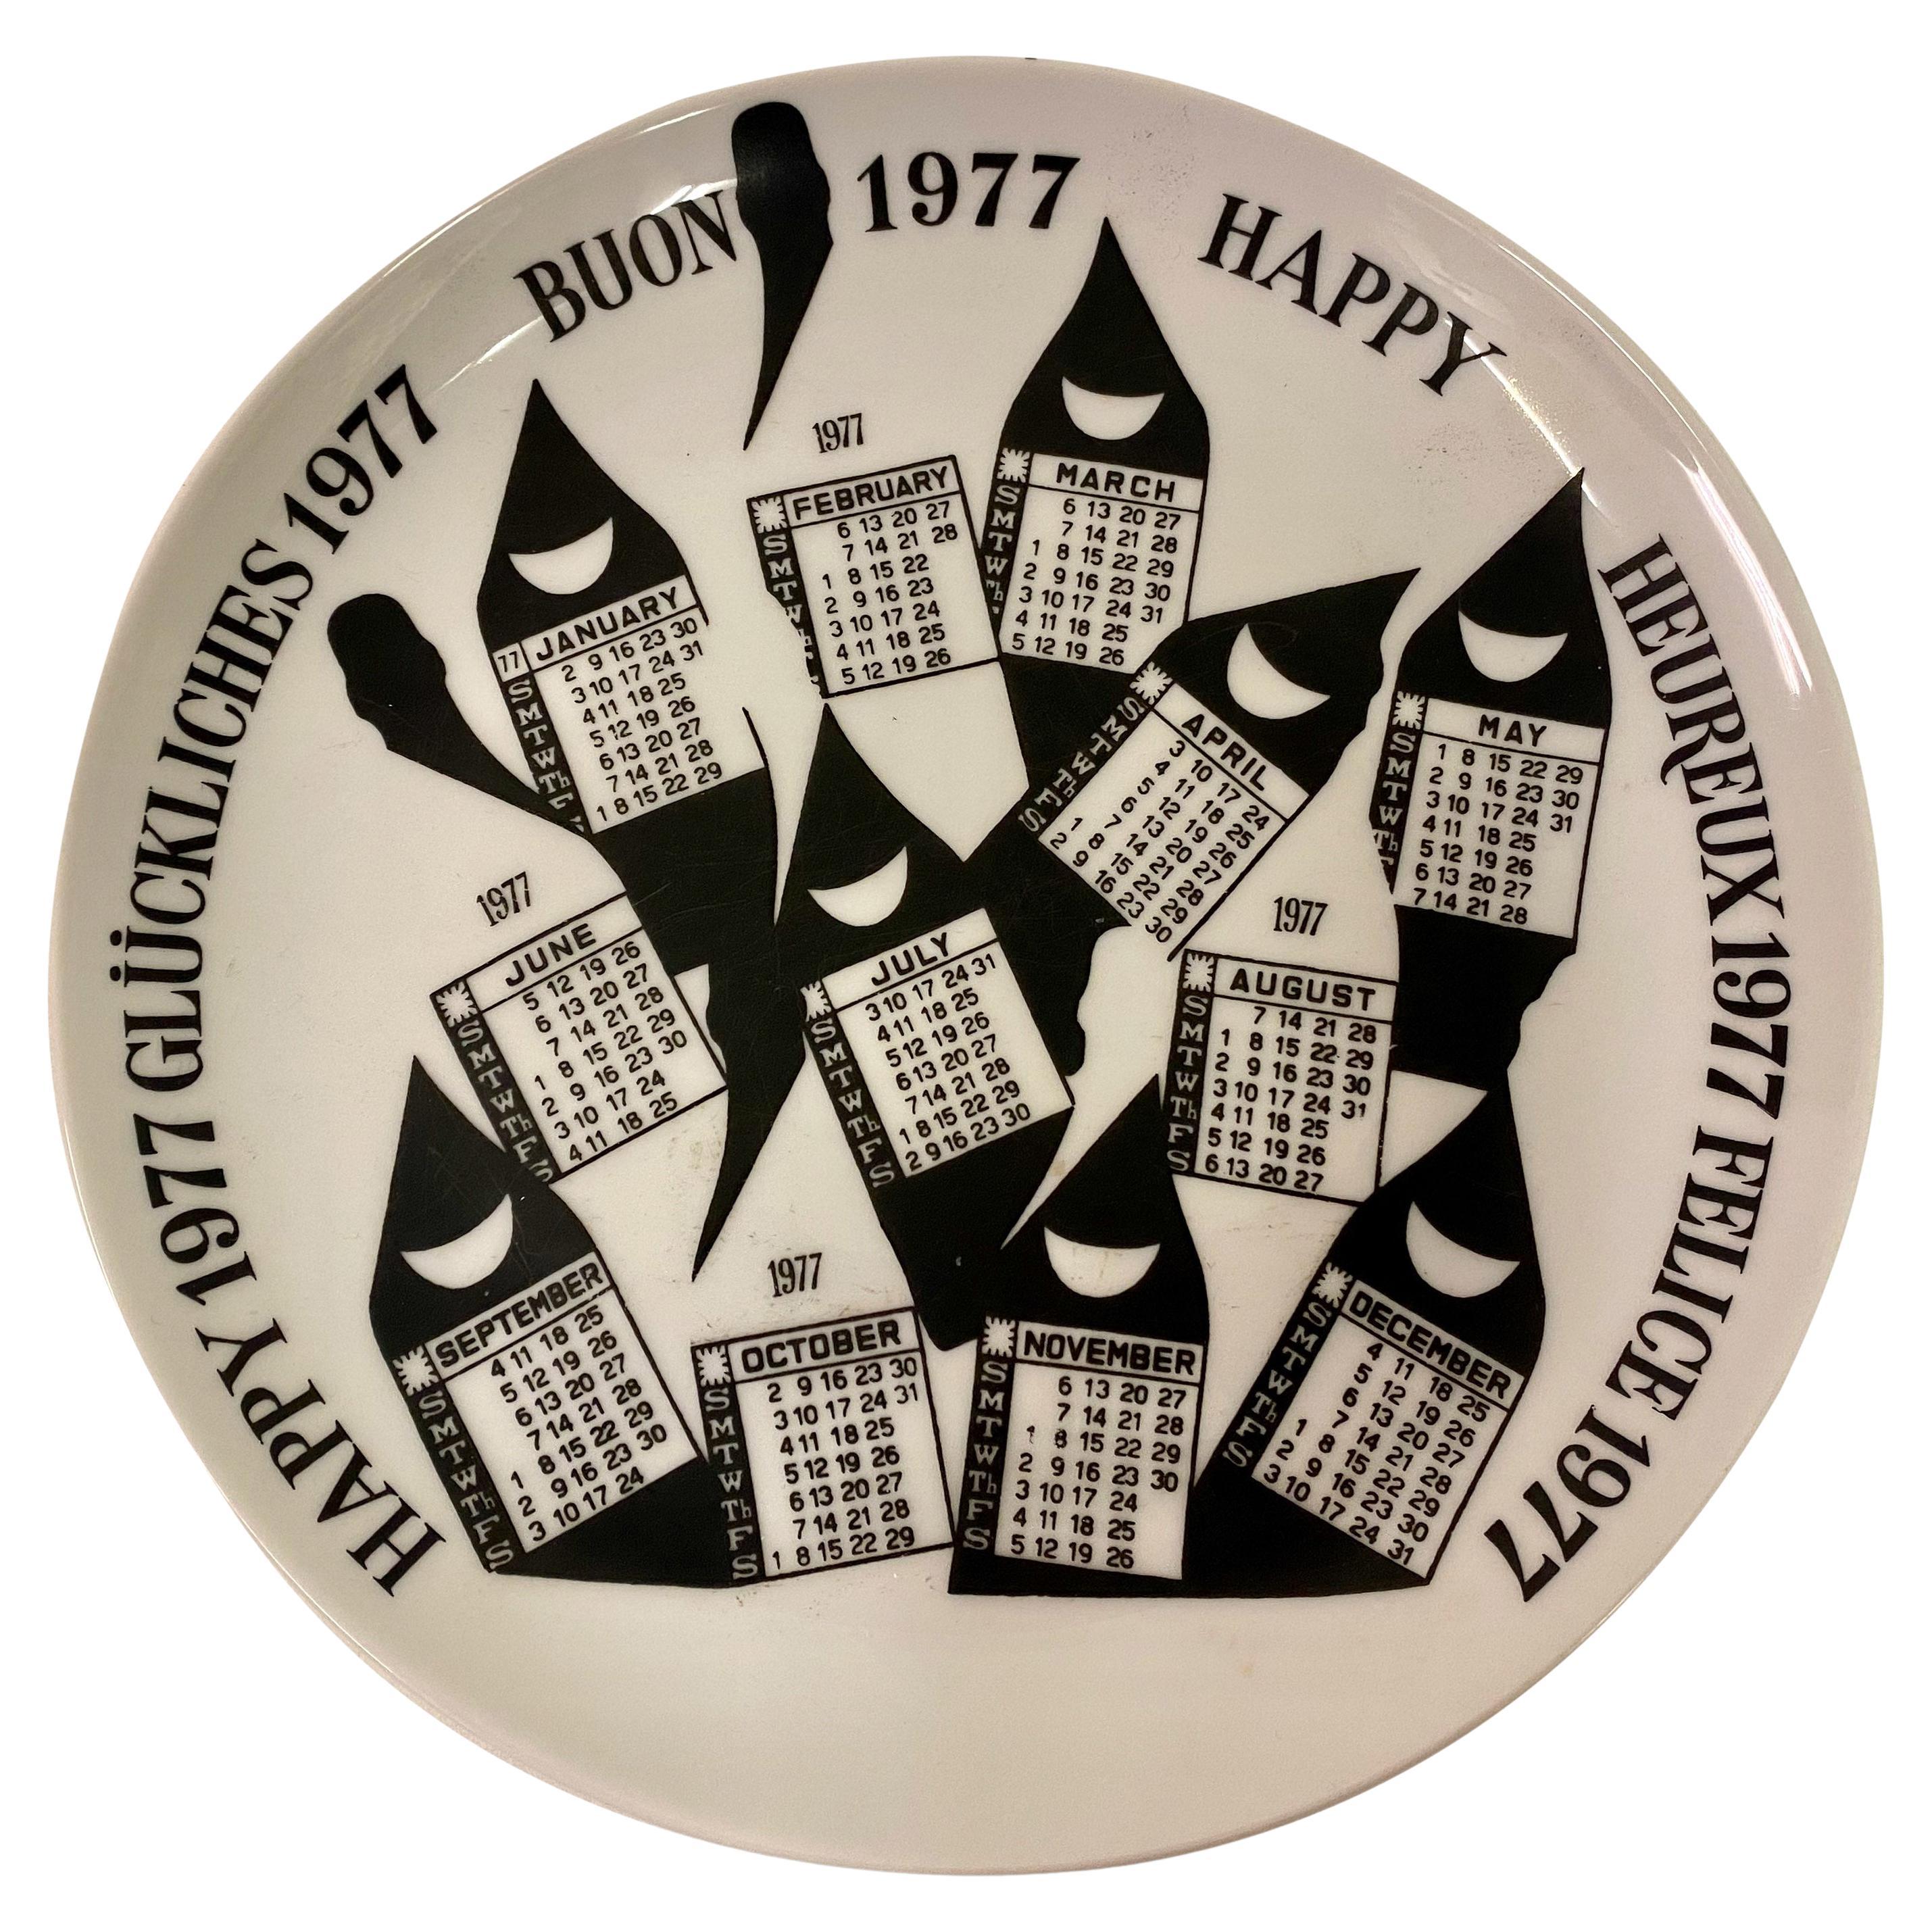 Where are Fornasetti plates made?